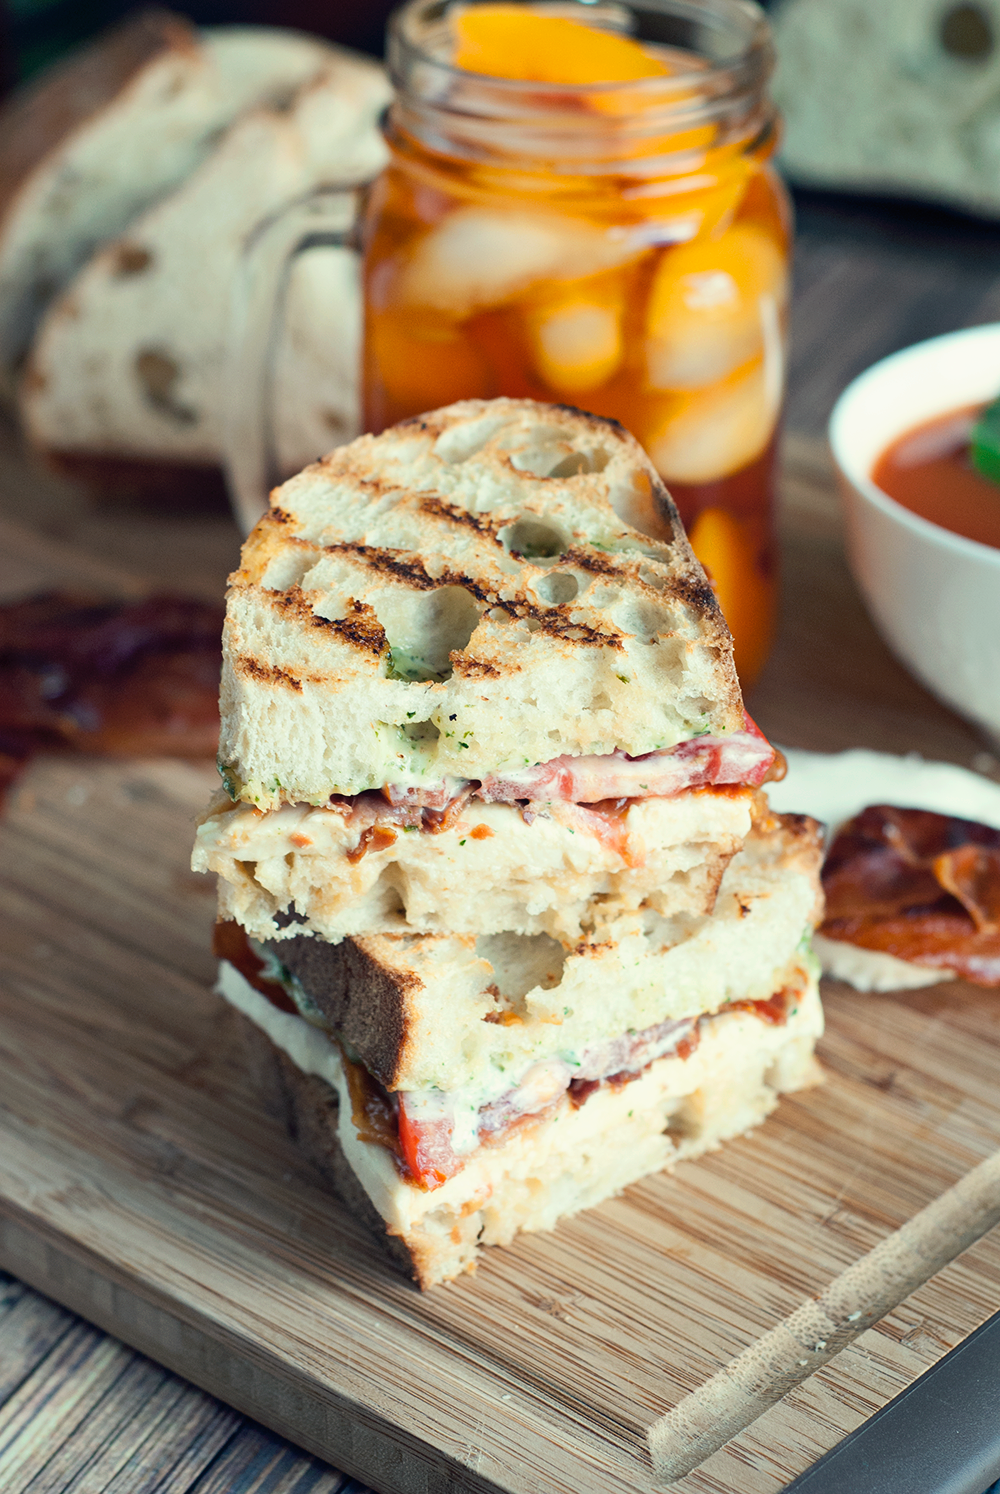 Grilled Prosciutto, Mozzarella, and Pesto Mayo Sandwich by A Simple Pantry